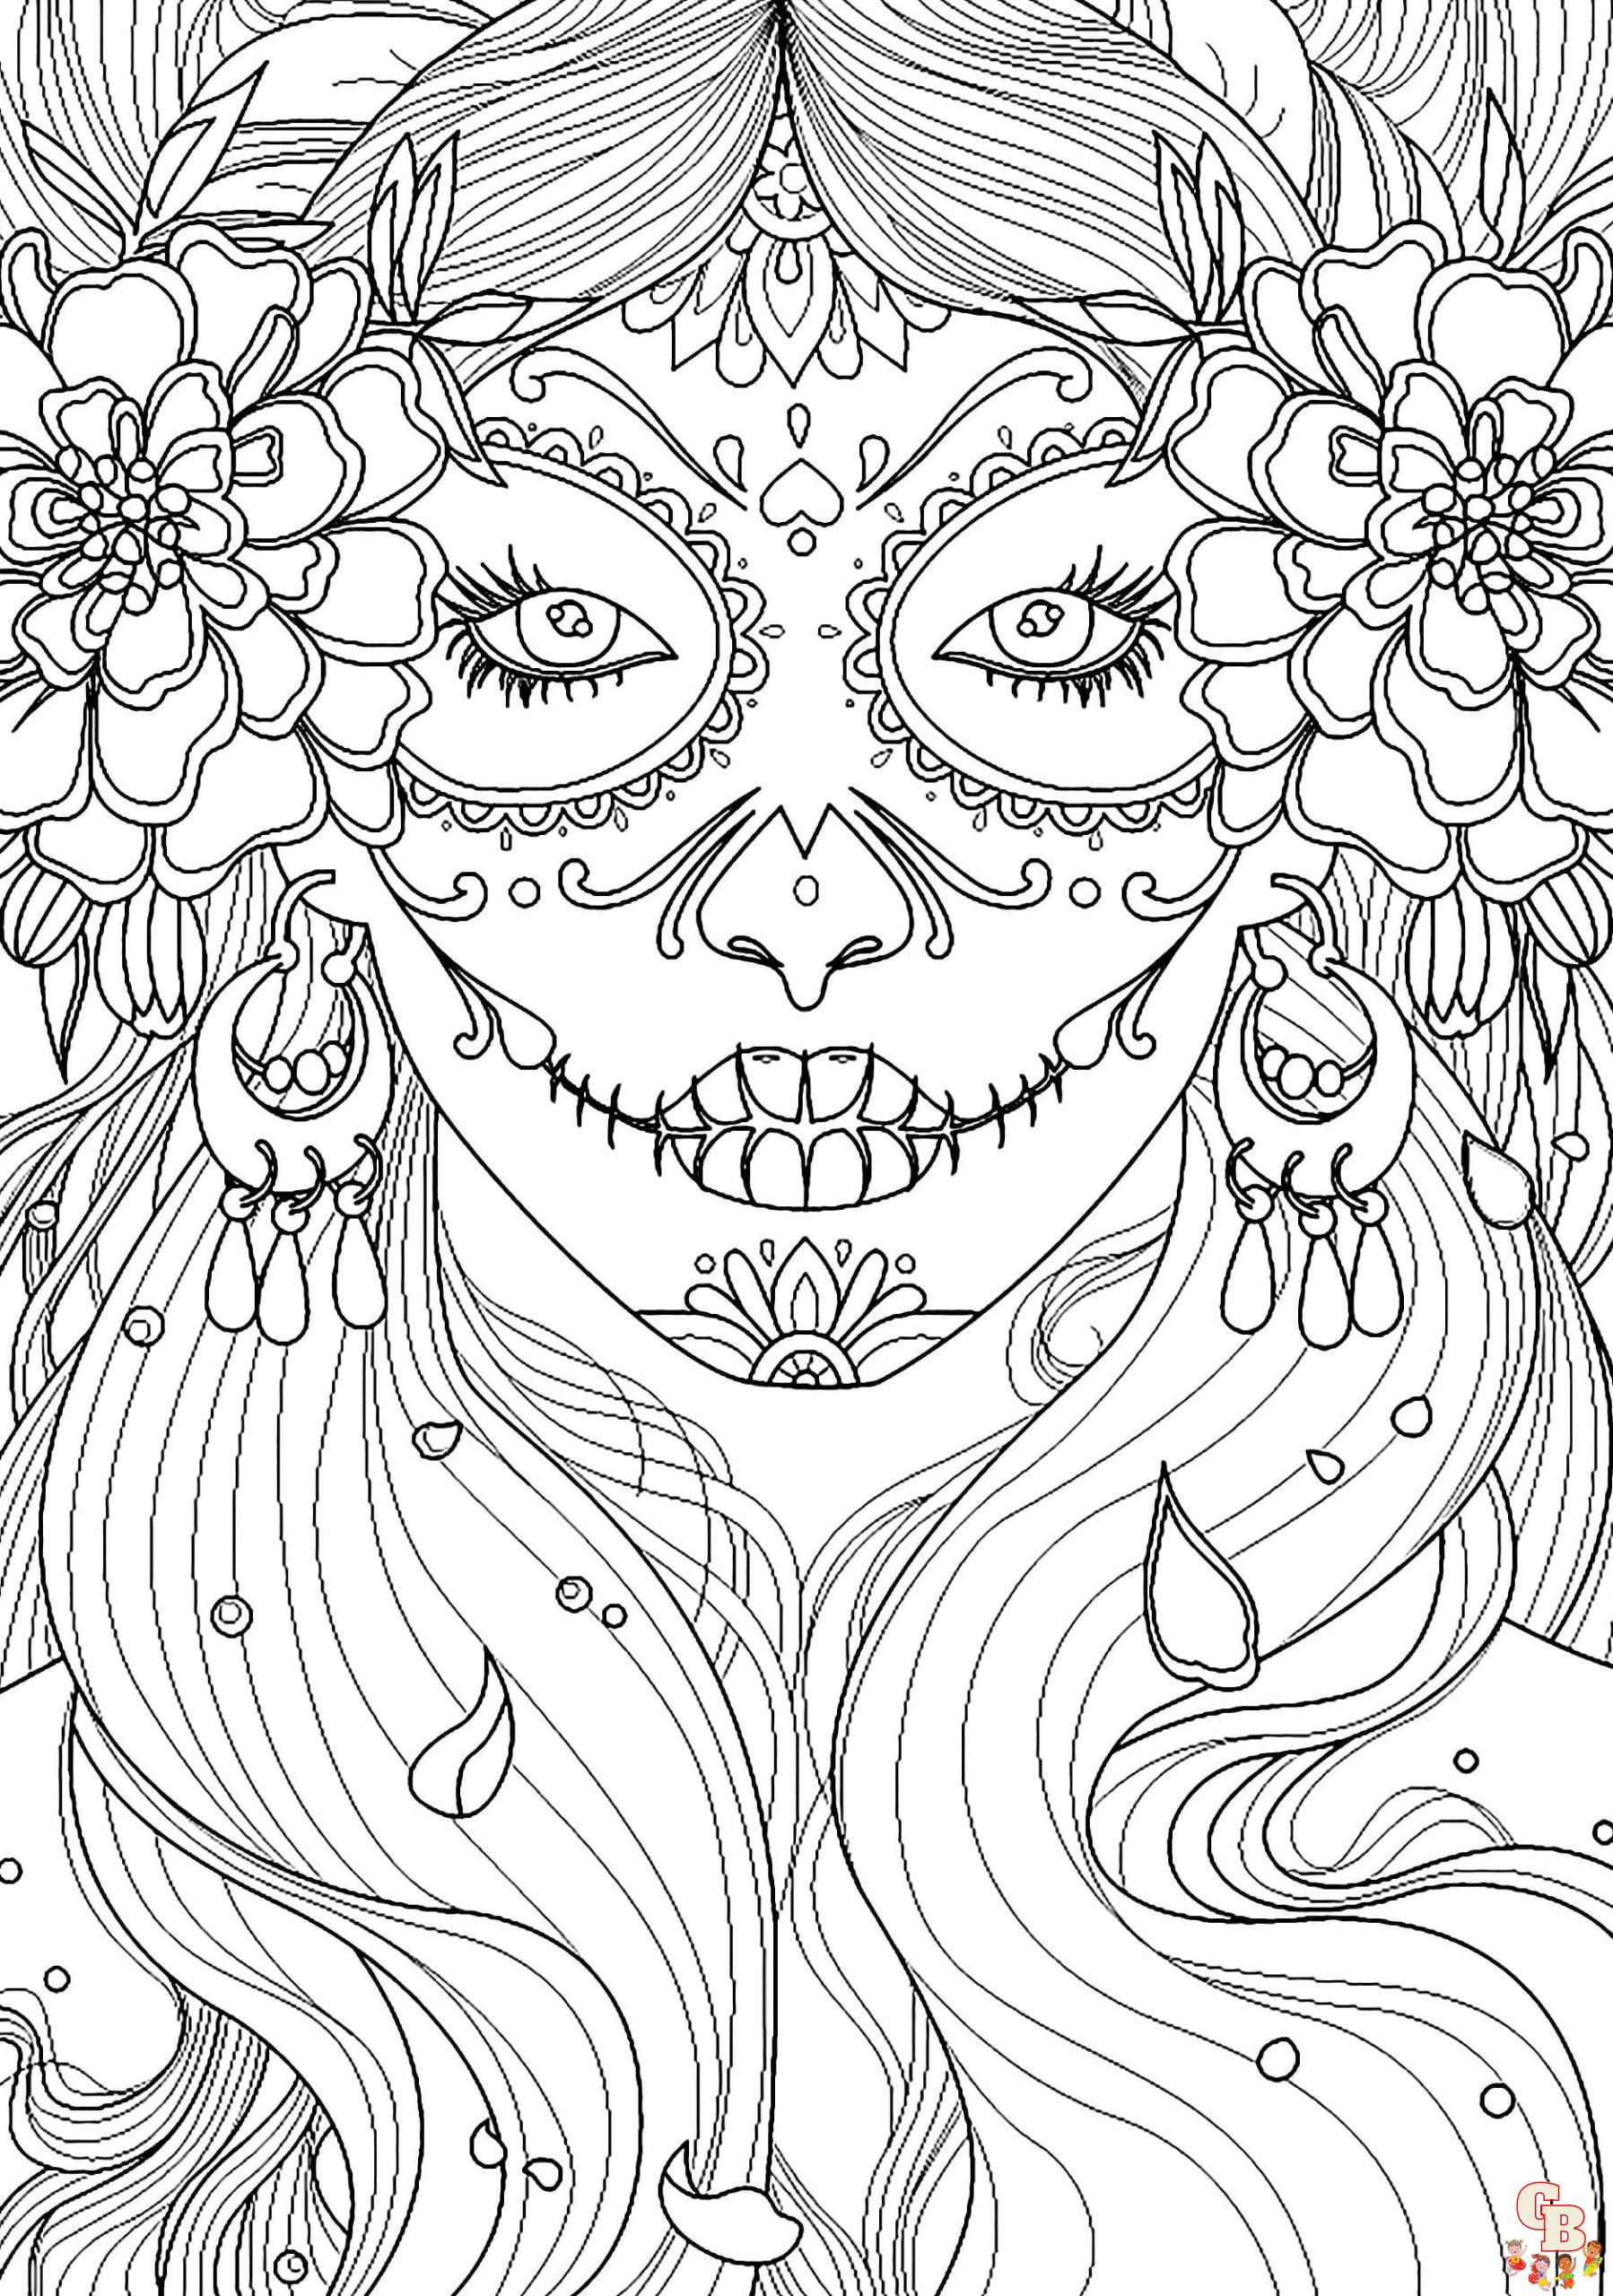 Day of the dead coloring sheets free